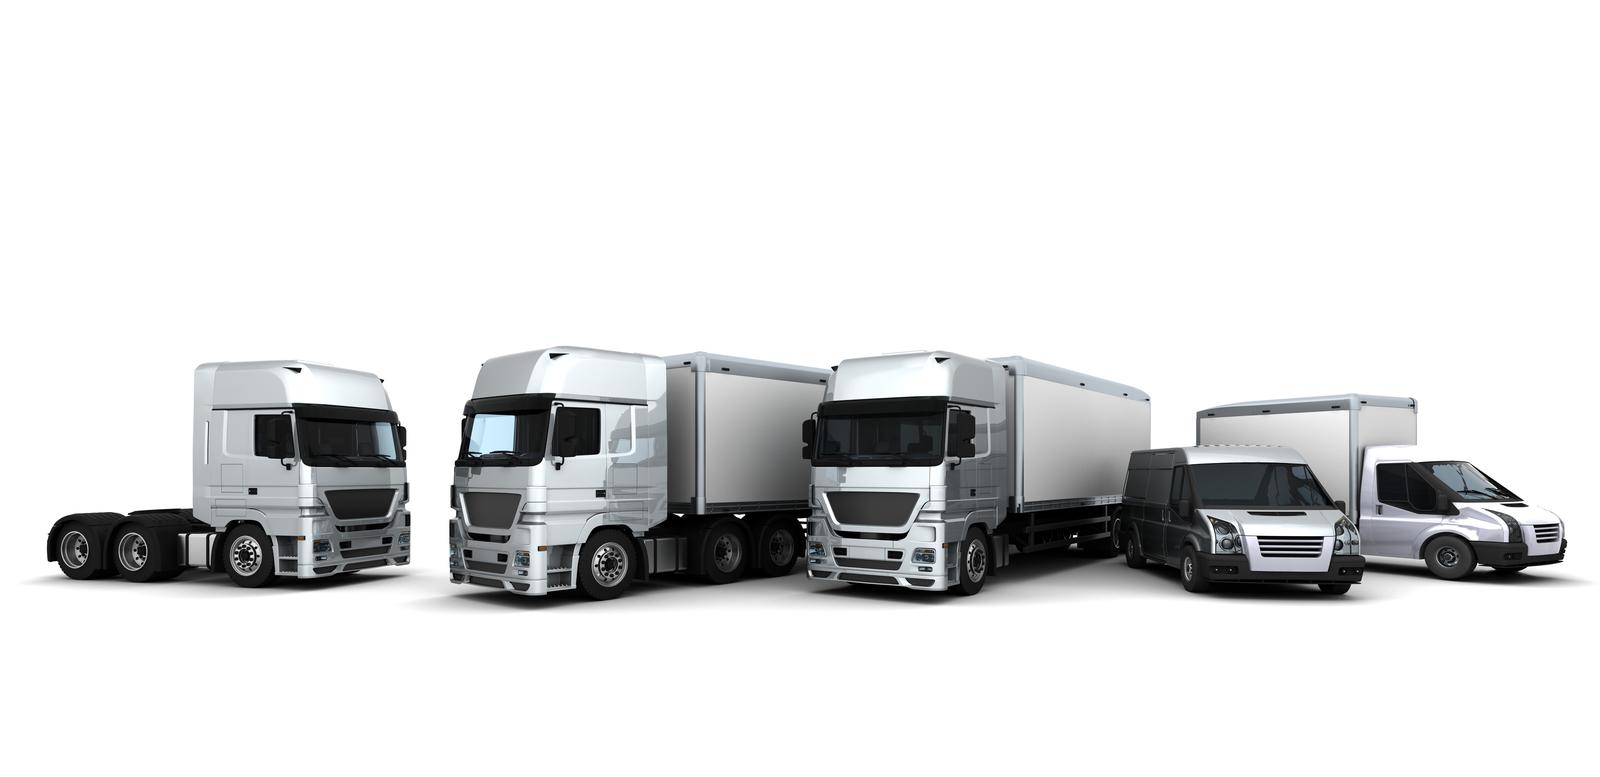 FLORIK & PARTNERS OÜ - transport services and other related services, products, consultations